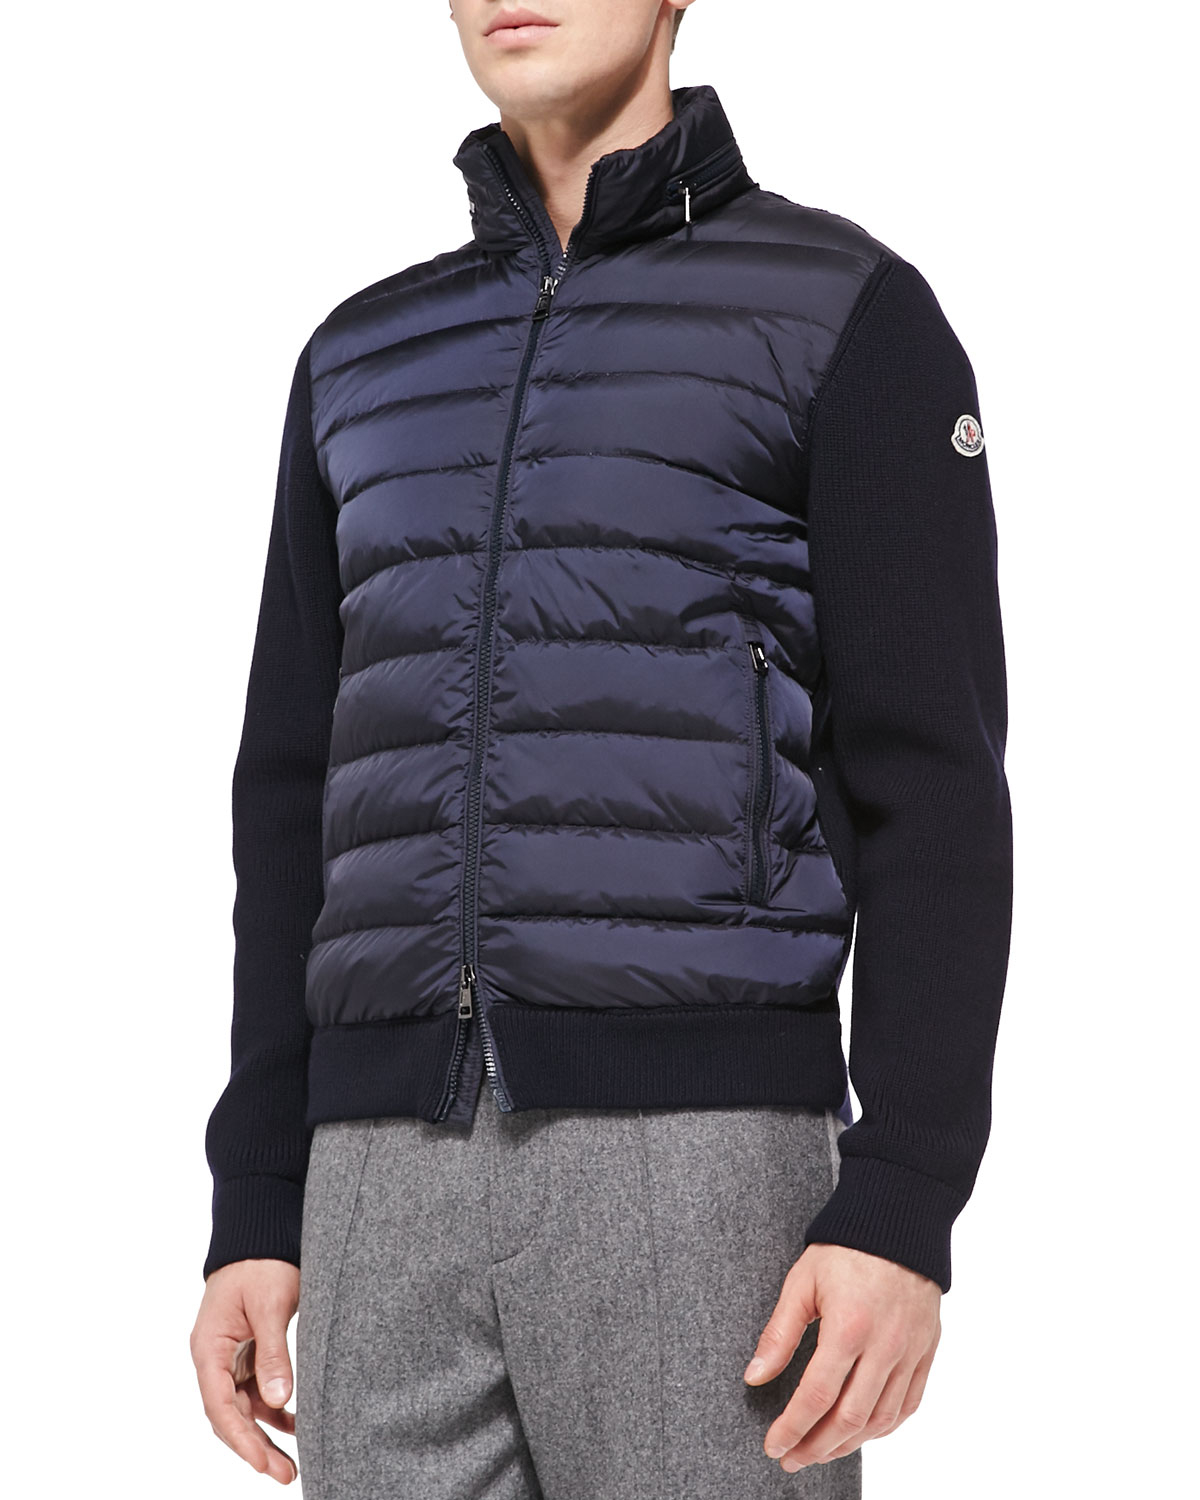 moncler sweater jacket men's,OFF 74%,www.concordehotels.com.tr